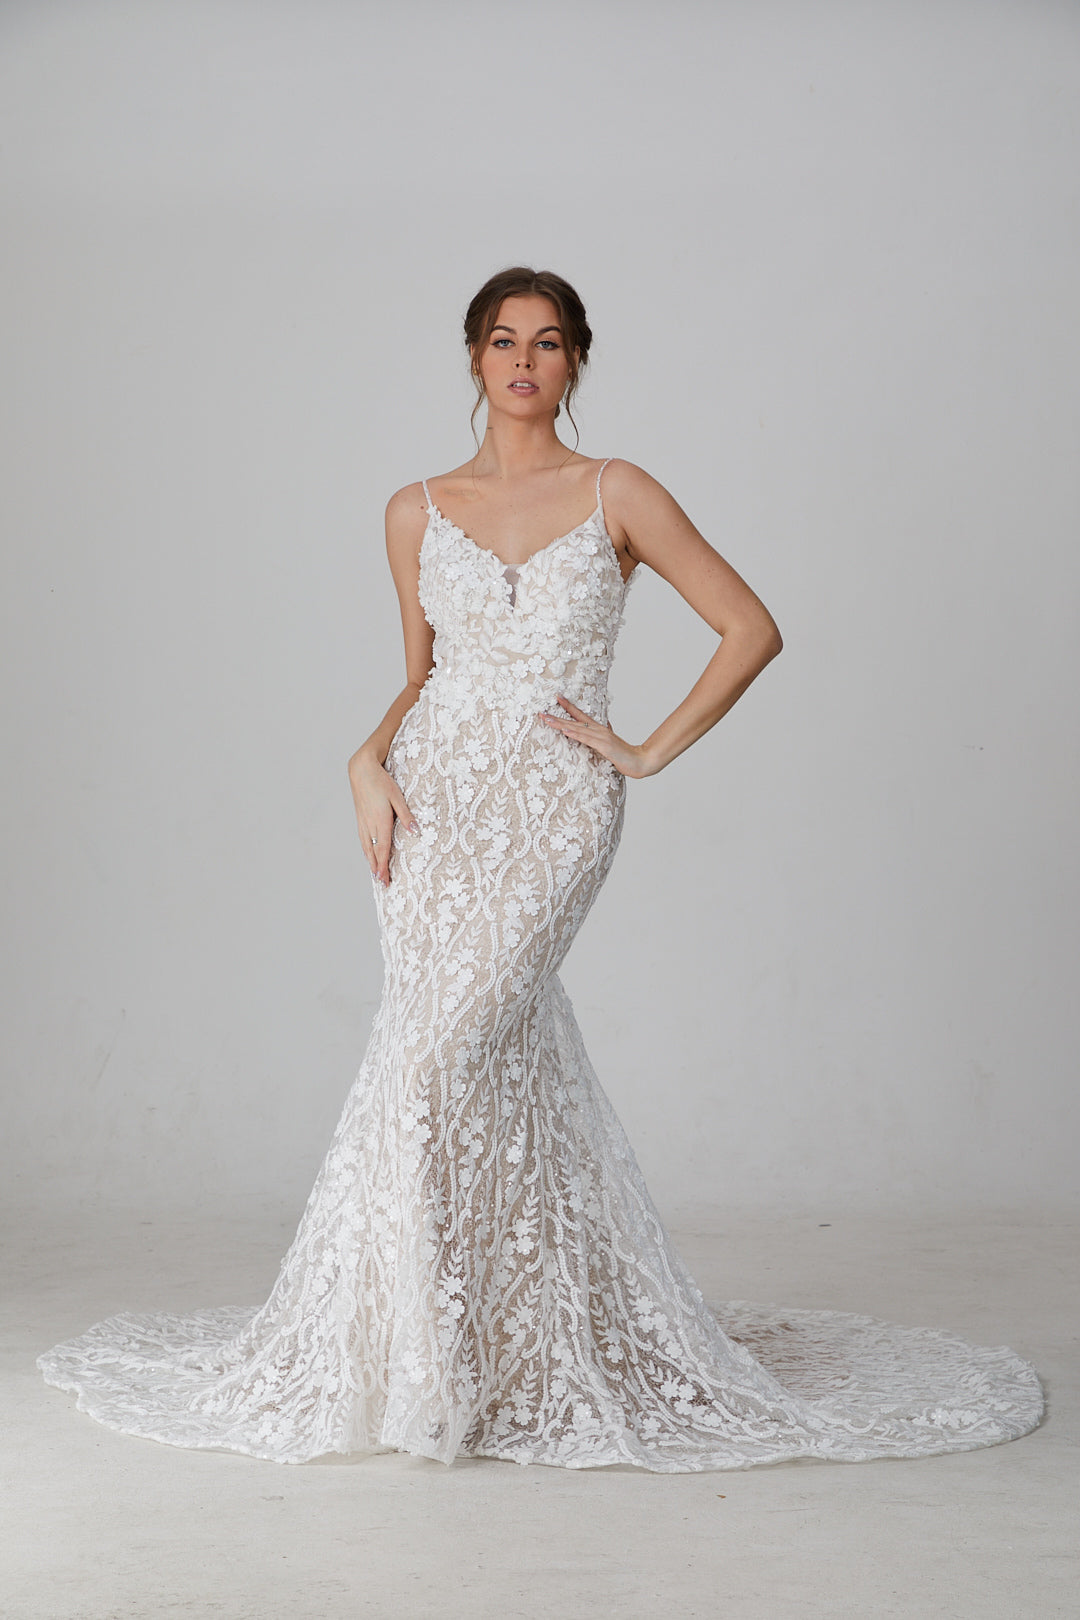 BelleAmour Couture MIRANDA White Lace Mermaid Bridal Gown